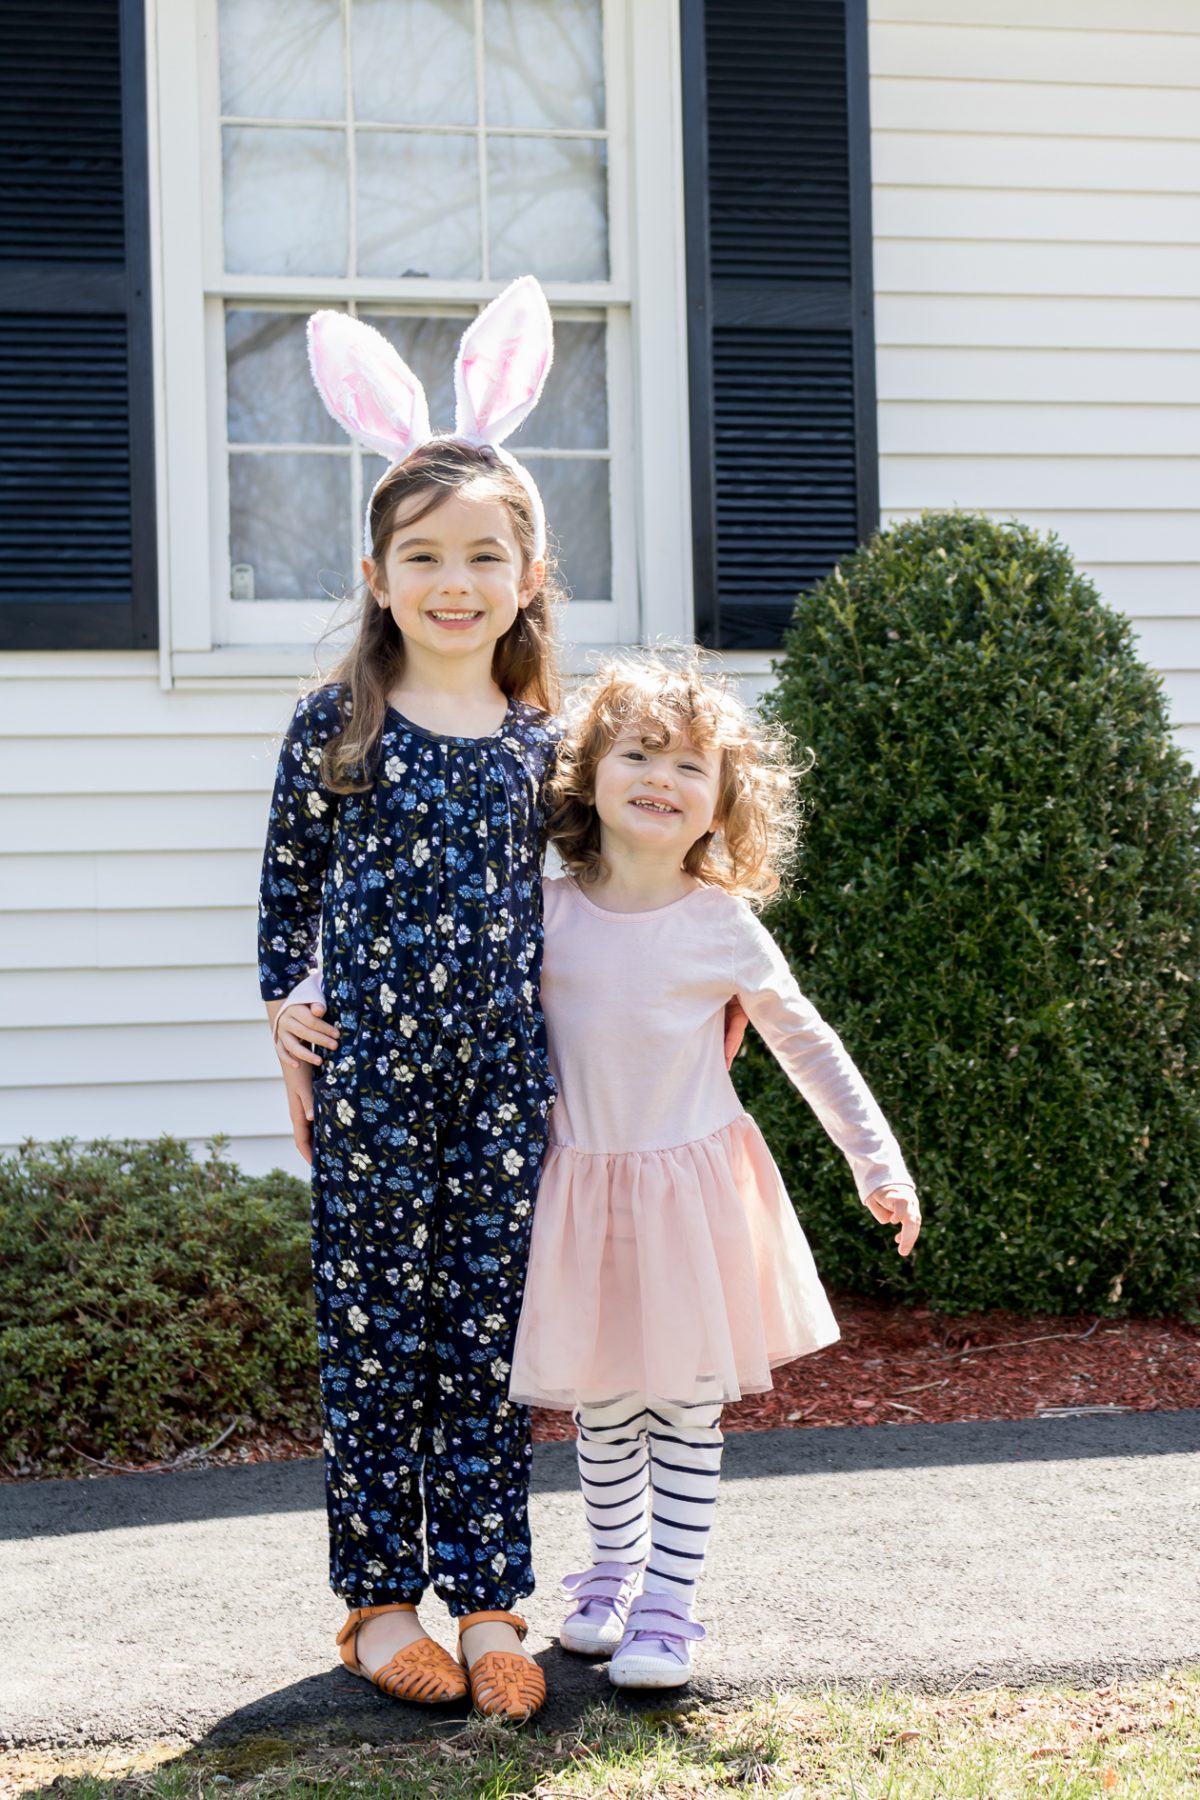 Childern - Little girl in blue jumpsuit and bunny ears and little girl with curly hair wearing a pink dress and blue striped pants